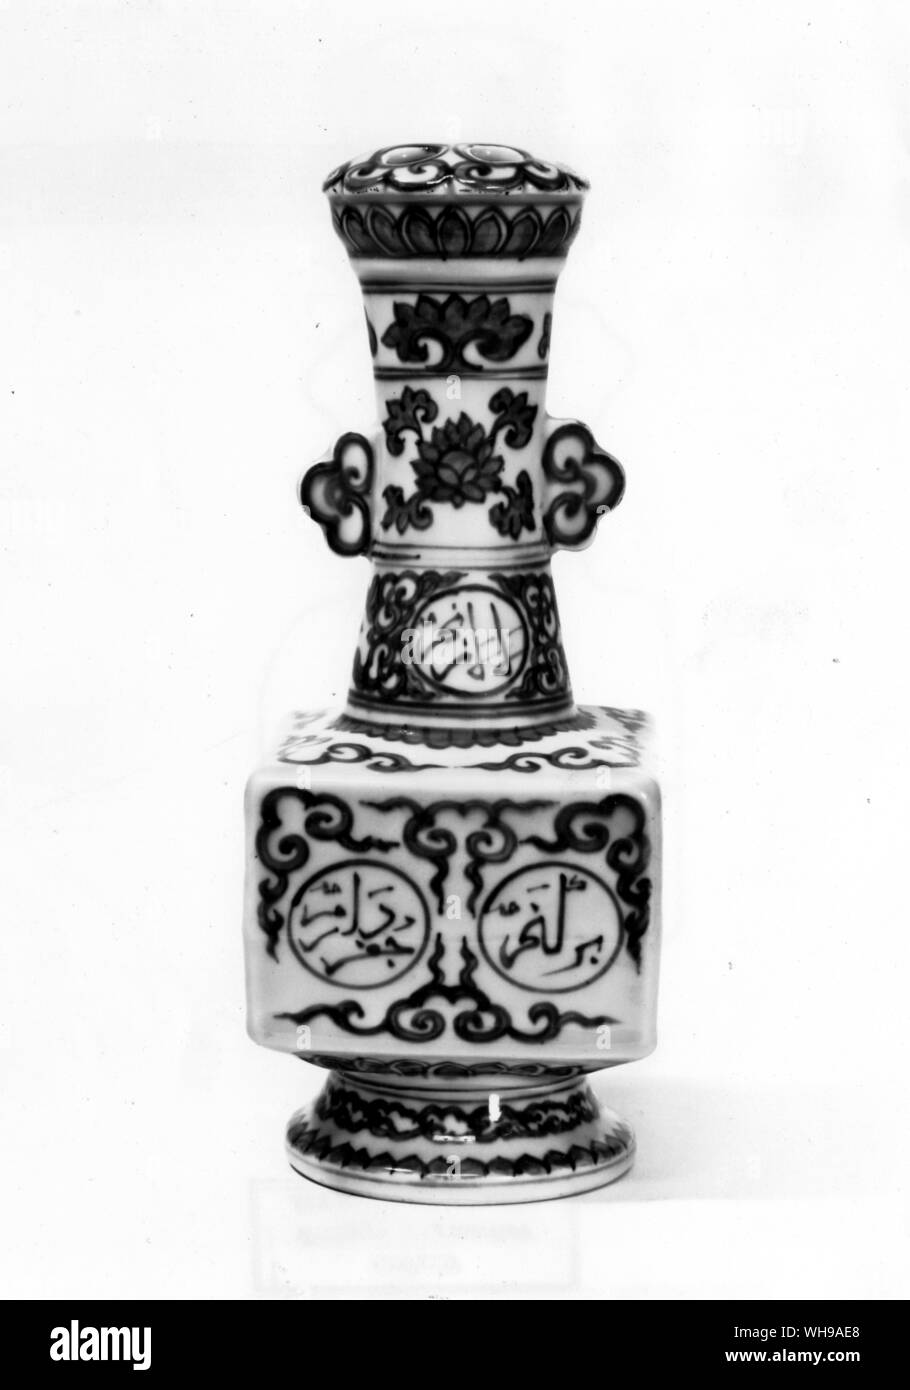 Early 16th century blue and white porcelain vase with an Arabic inscription, probably made for the use of Muslim eunuchs at the Chinese Court. Stock Photo